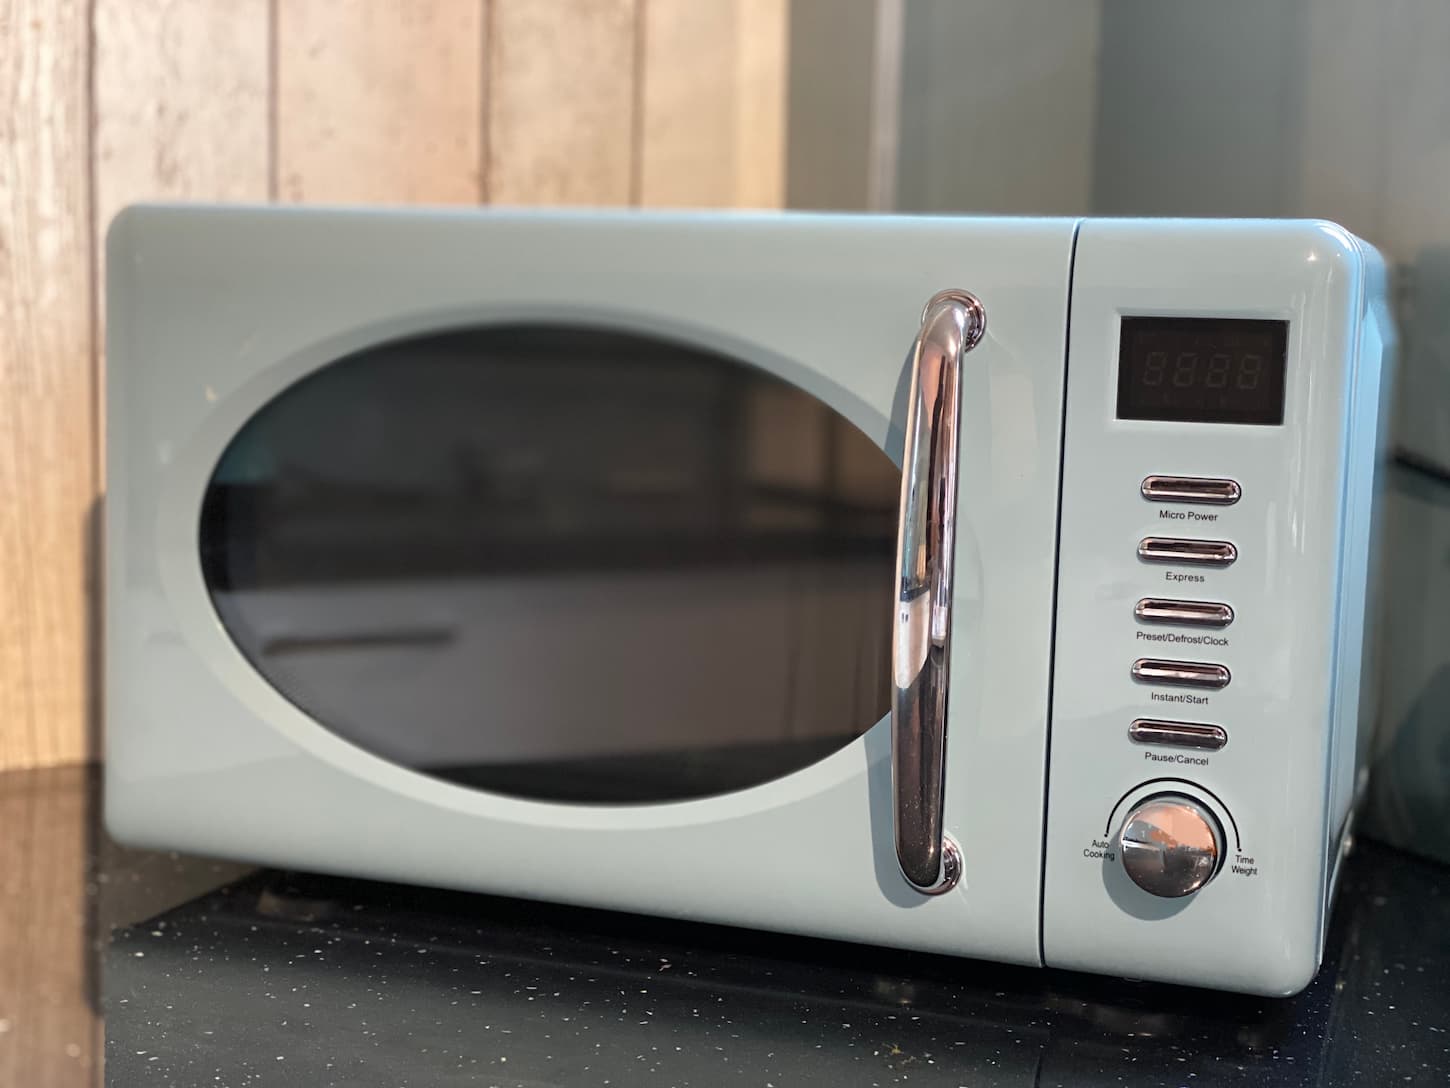 An image of a Blue Microwave oven on a kitchen glitter work top.